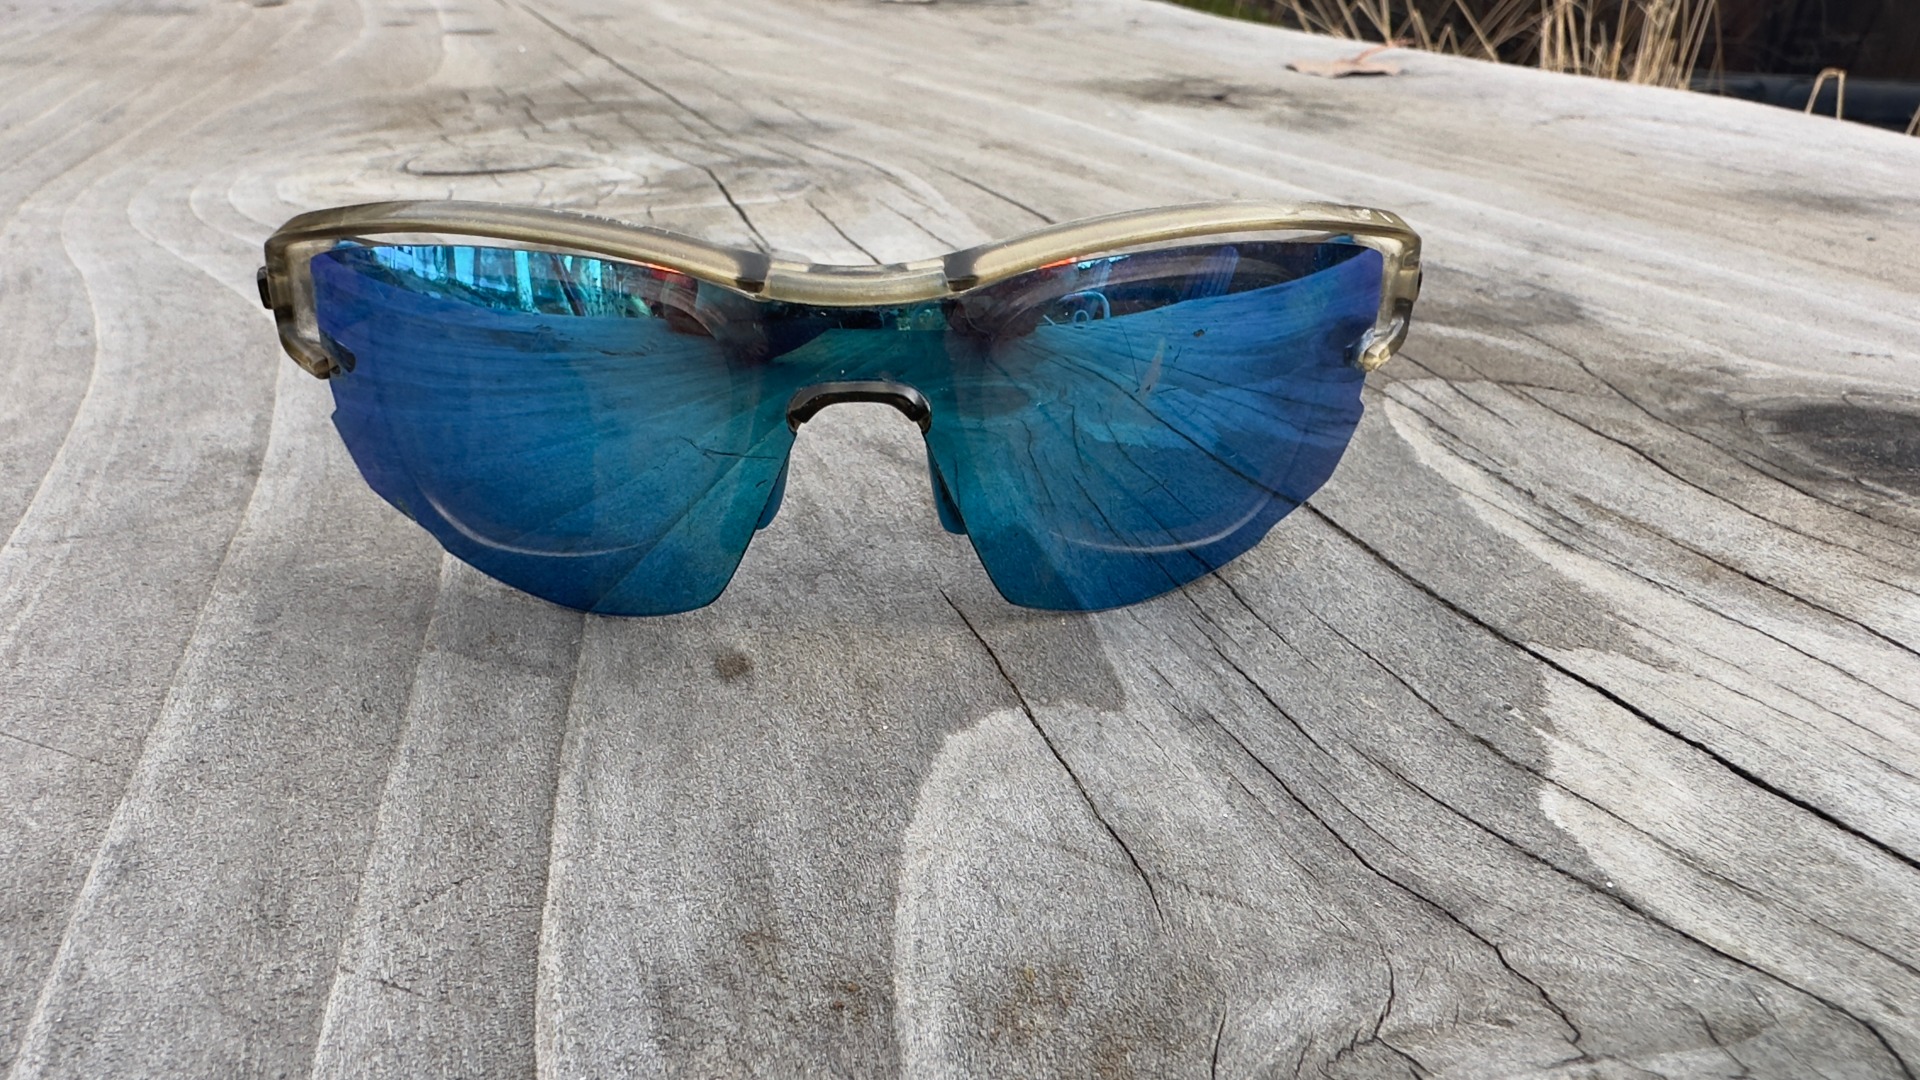 Julbo's Montebianco 2 with the Reactiv 1-3 High Contrast lens: A Review ...